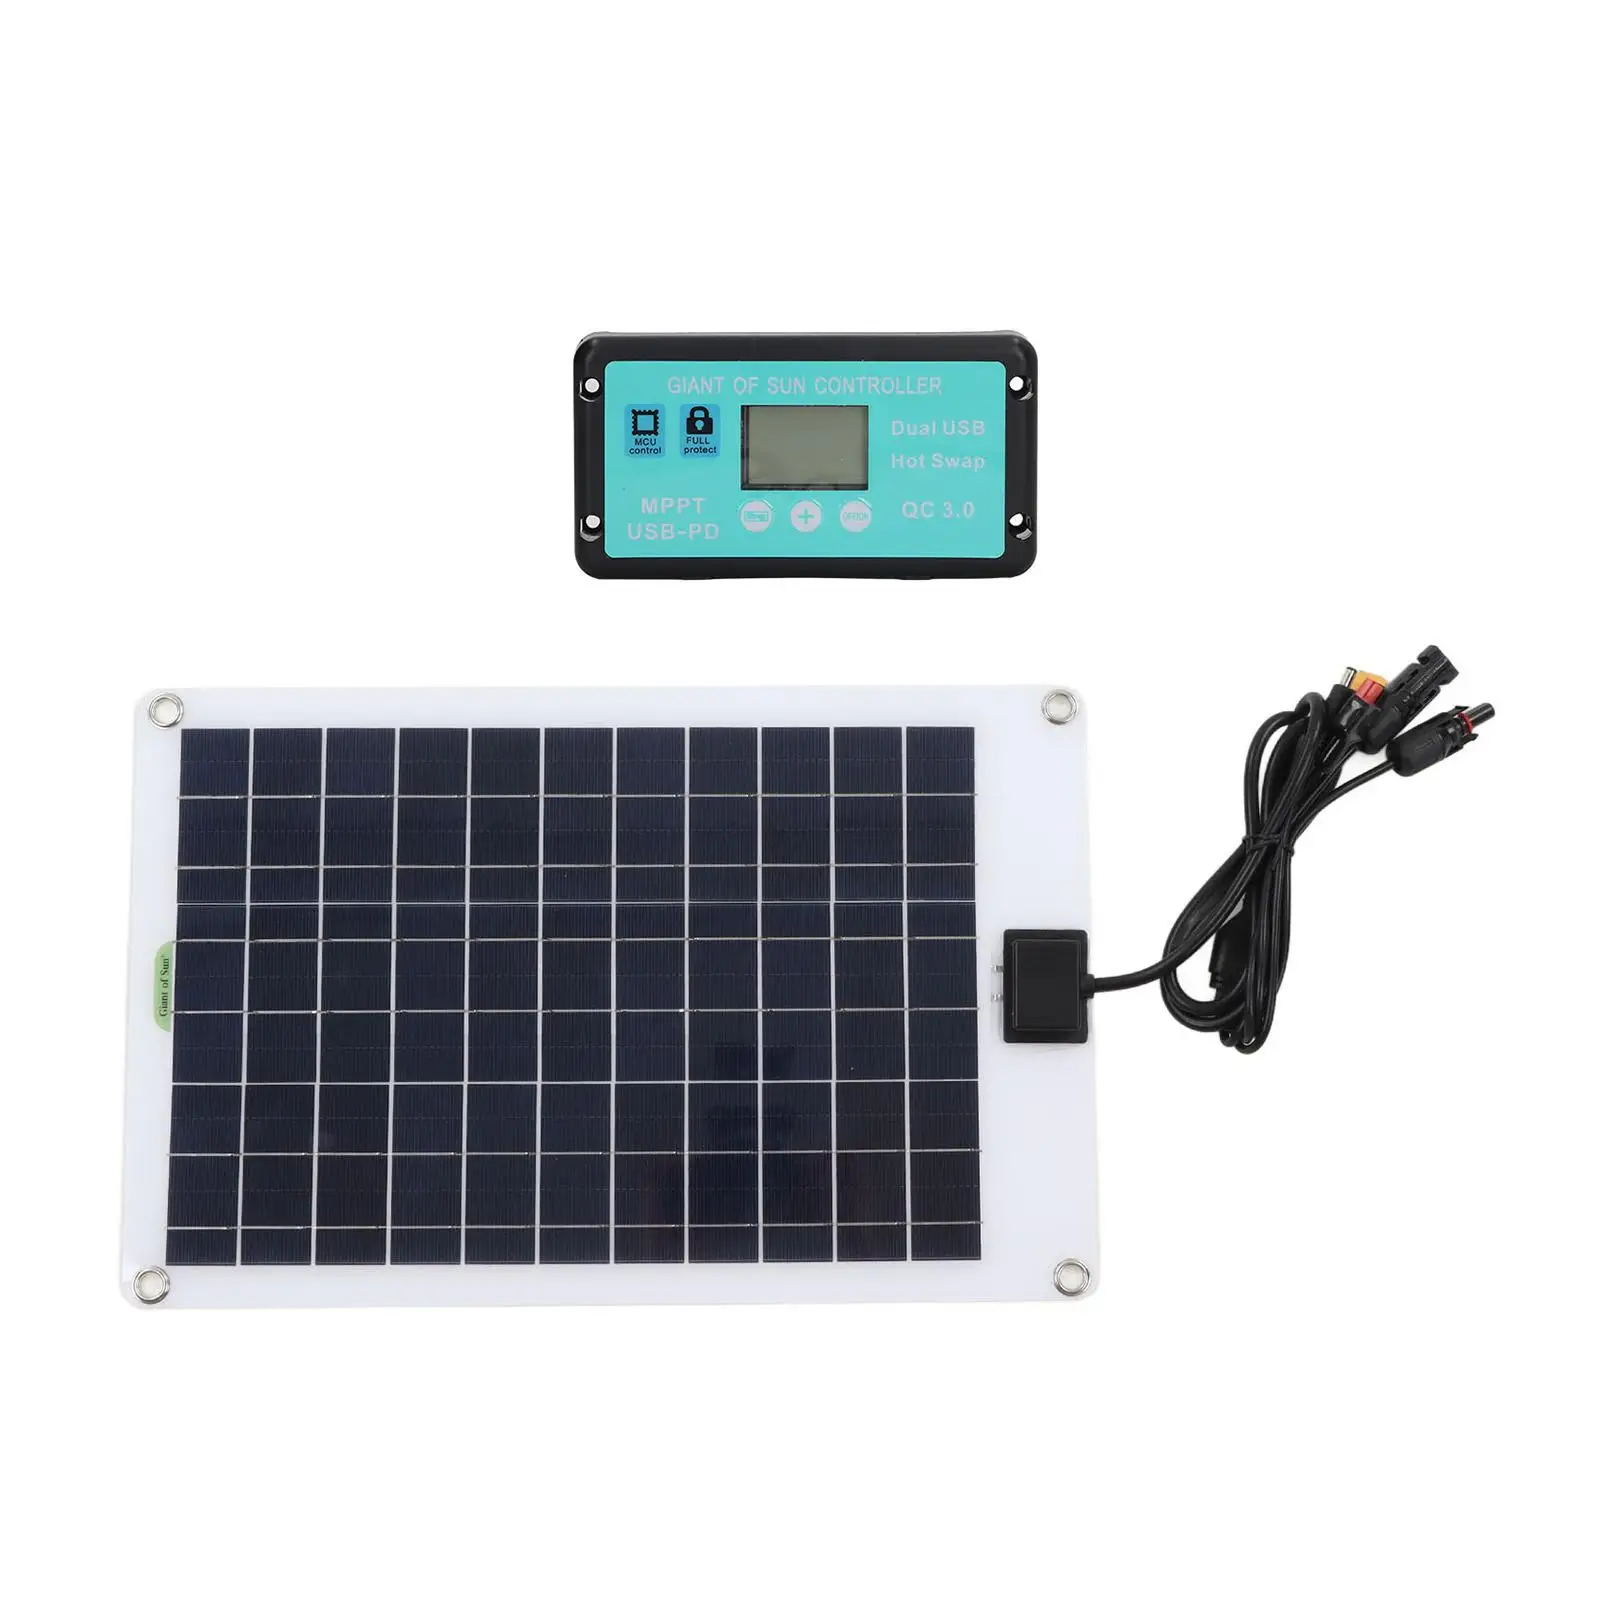 Monocrystalline Silicon Solar Panel with Dual USB Mppt Controller Solar Charge Controller LCD Display XT60 50W for Car RV Yacht